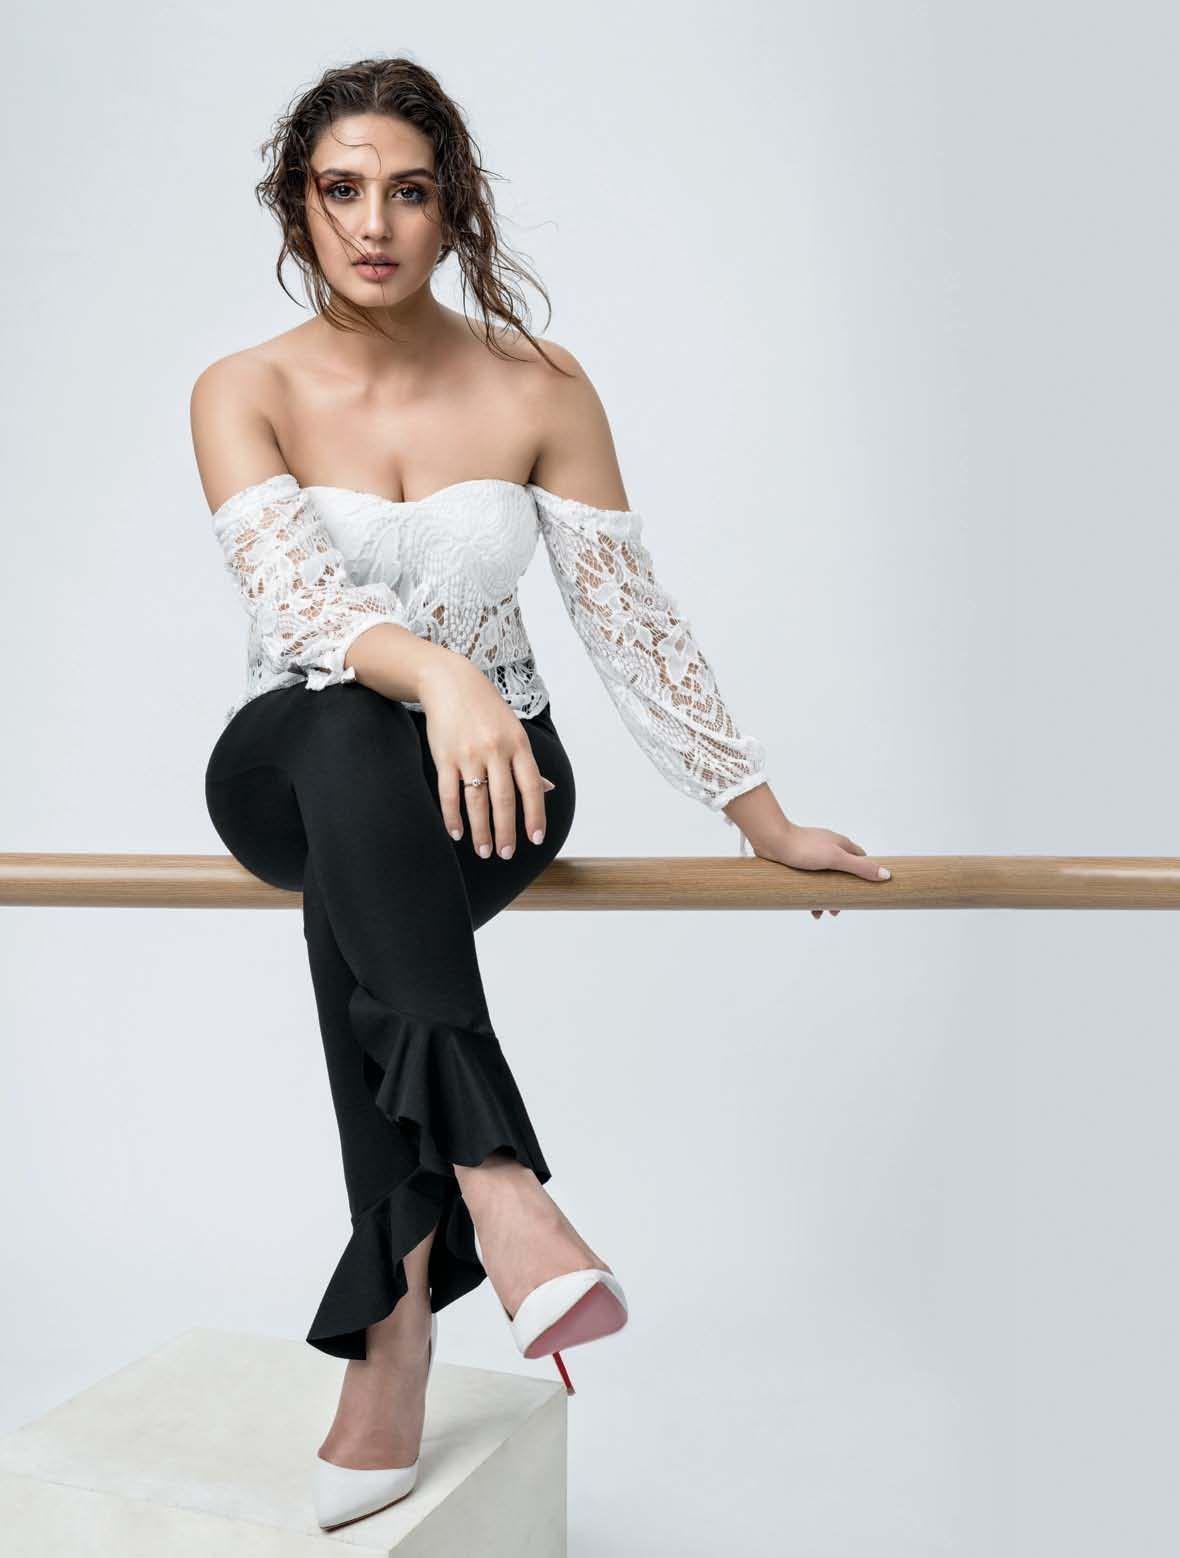 Huma Qureshi in Filmfare September 2017 Photoshoot | Picture 1523720